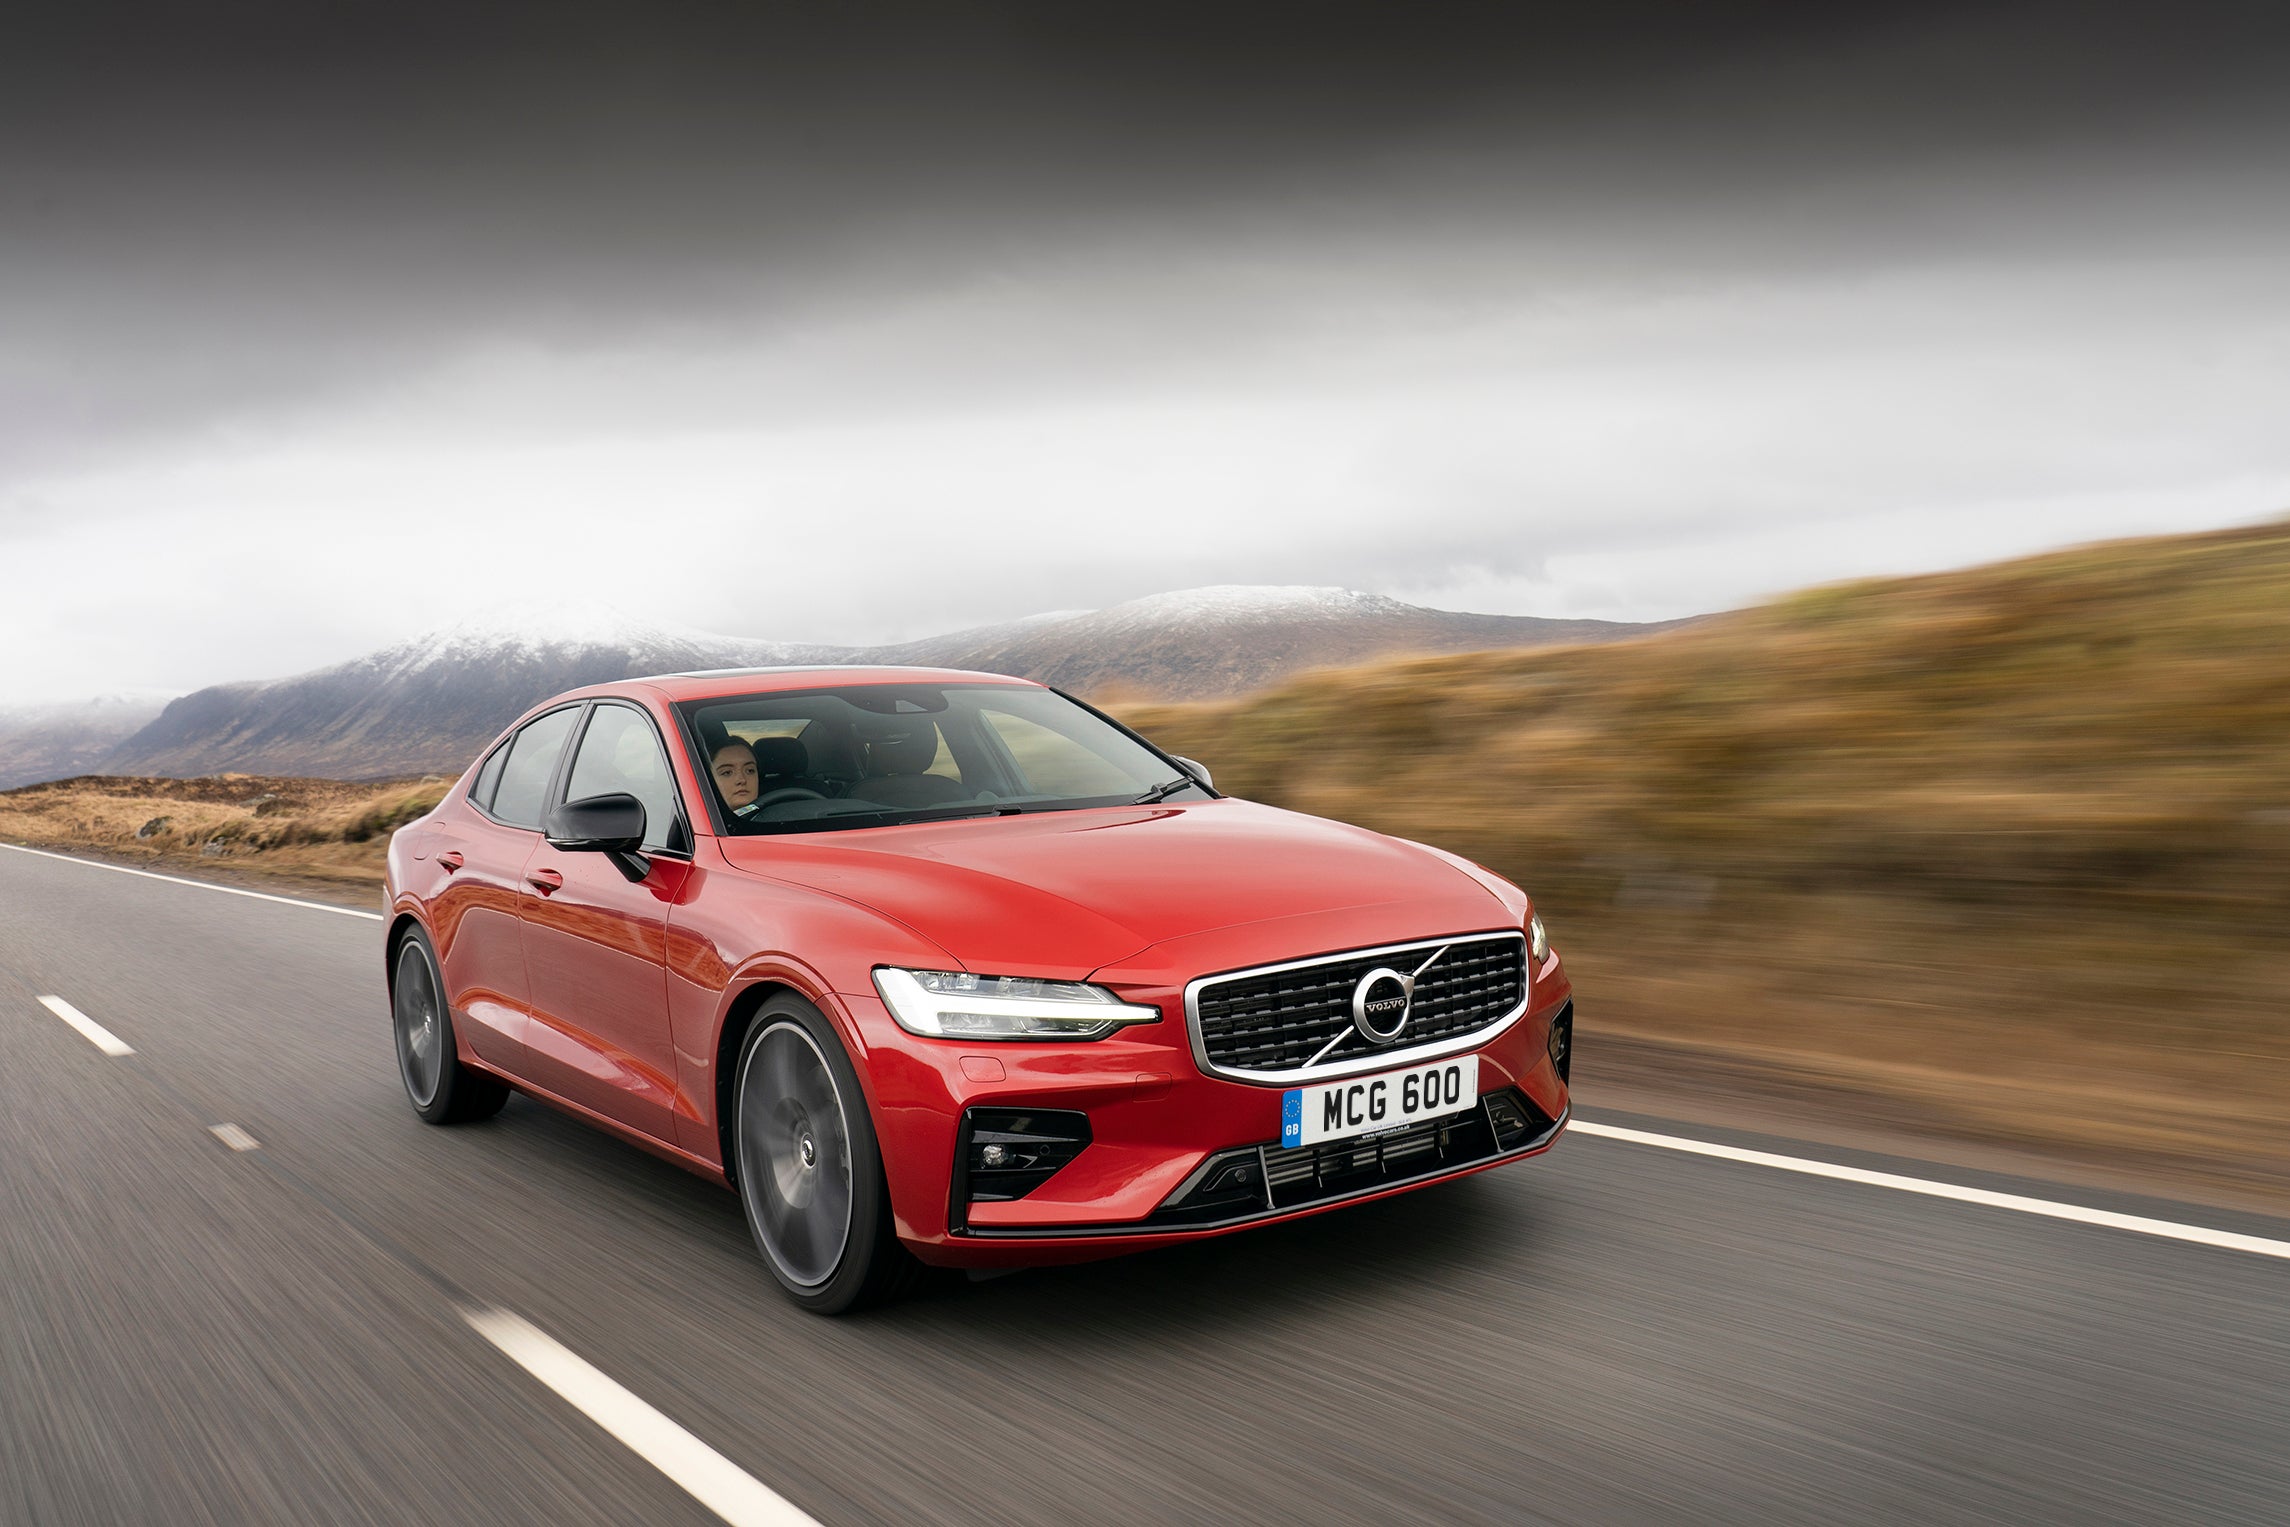 Affected models are Volvos produced between 2014 and 2019 that have a two-litre, four-cylinder diesel engine